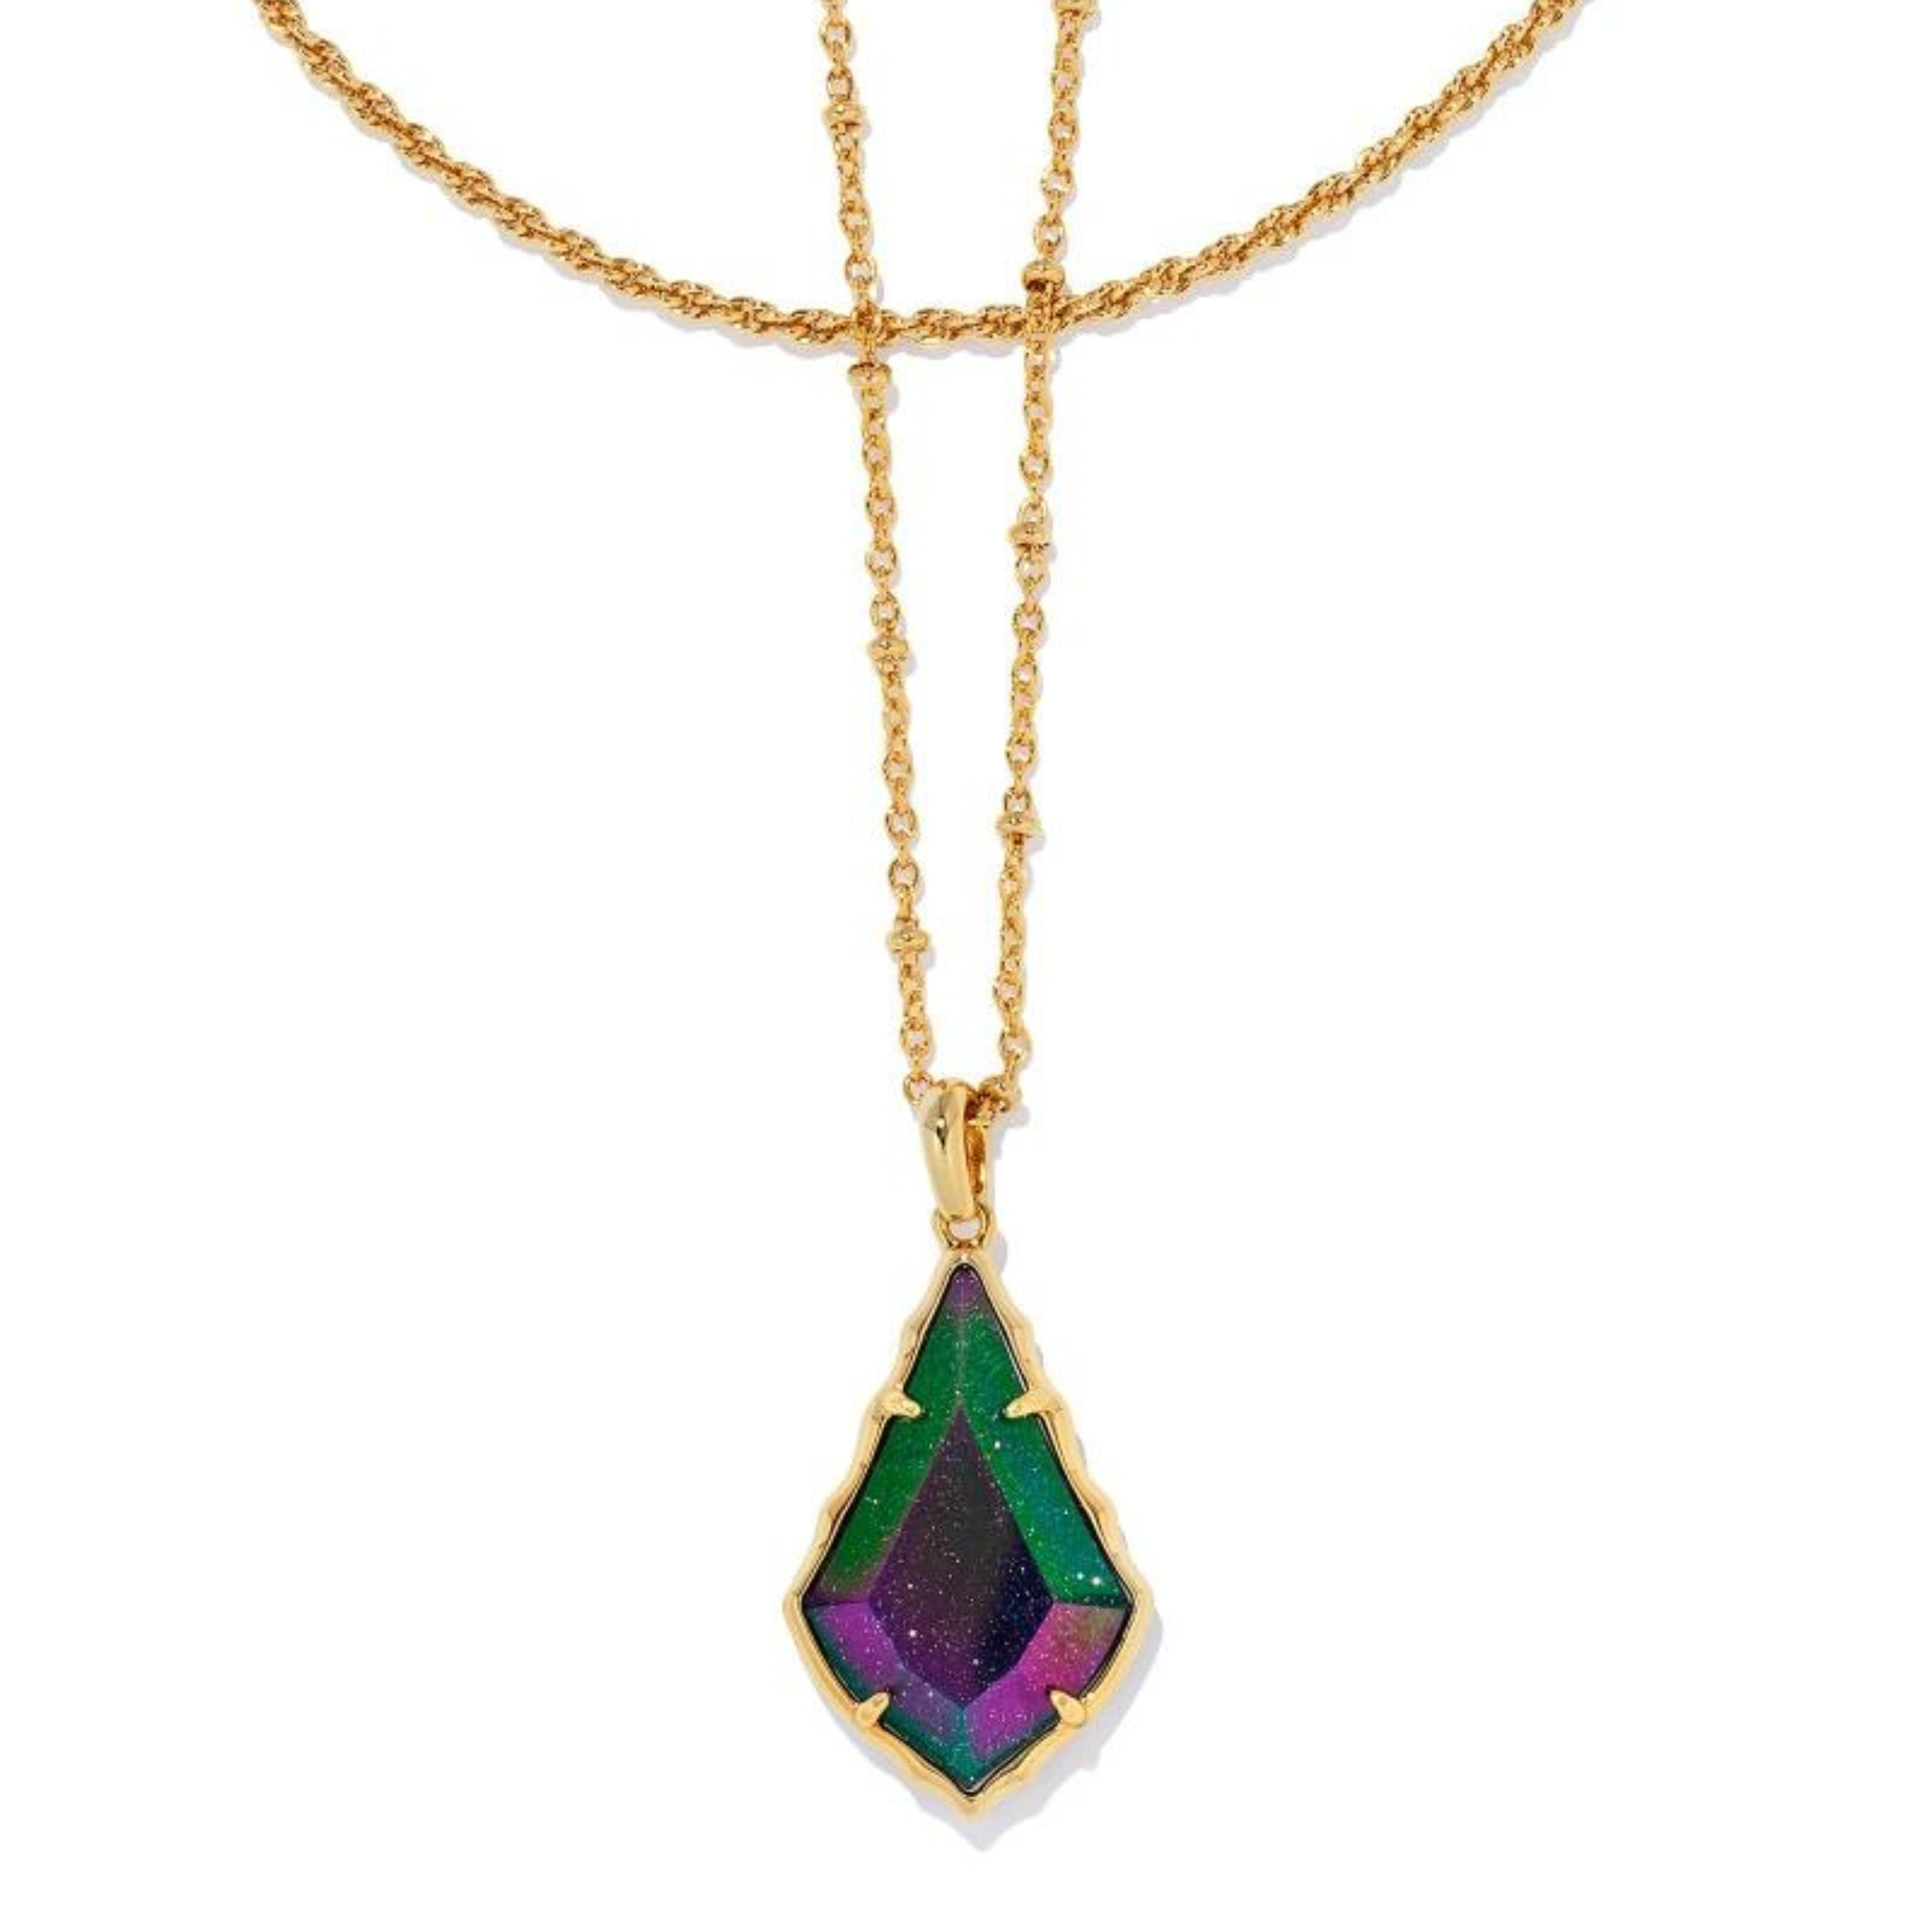 Gold convertiable layering necklace with an iridescent blue goldstone pendant, pictured on a white background.